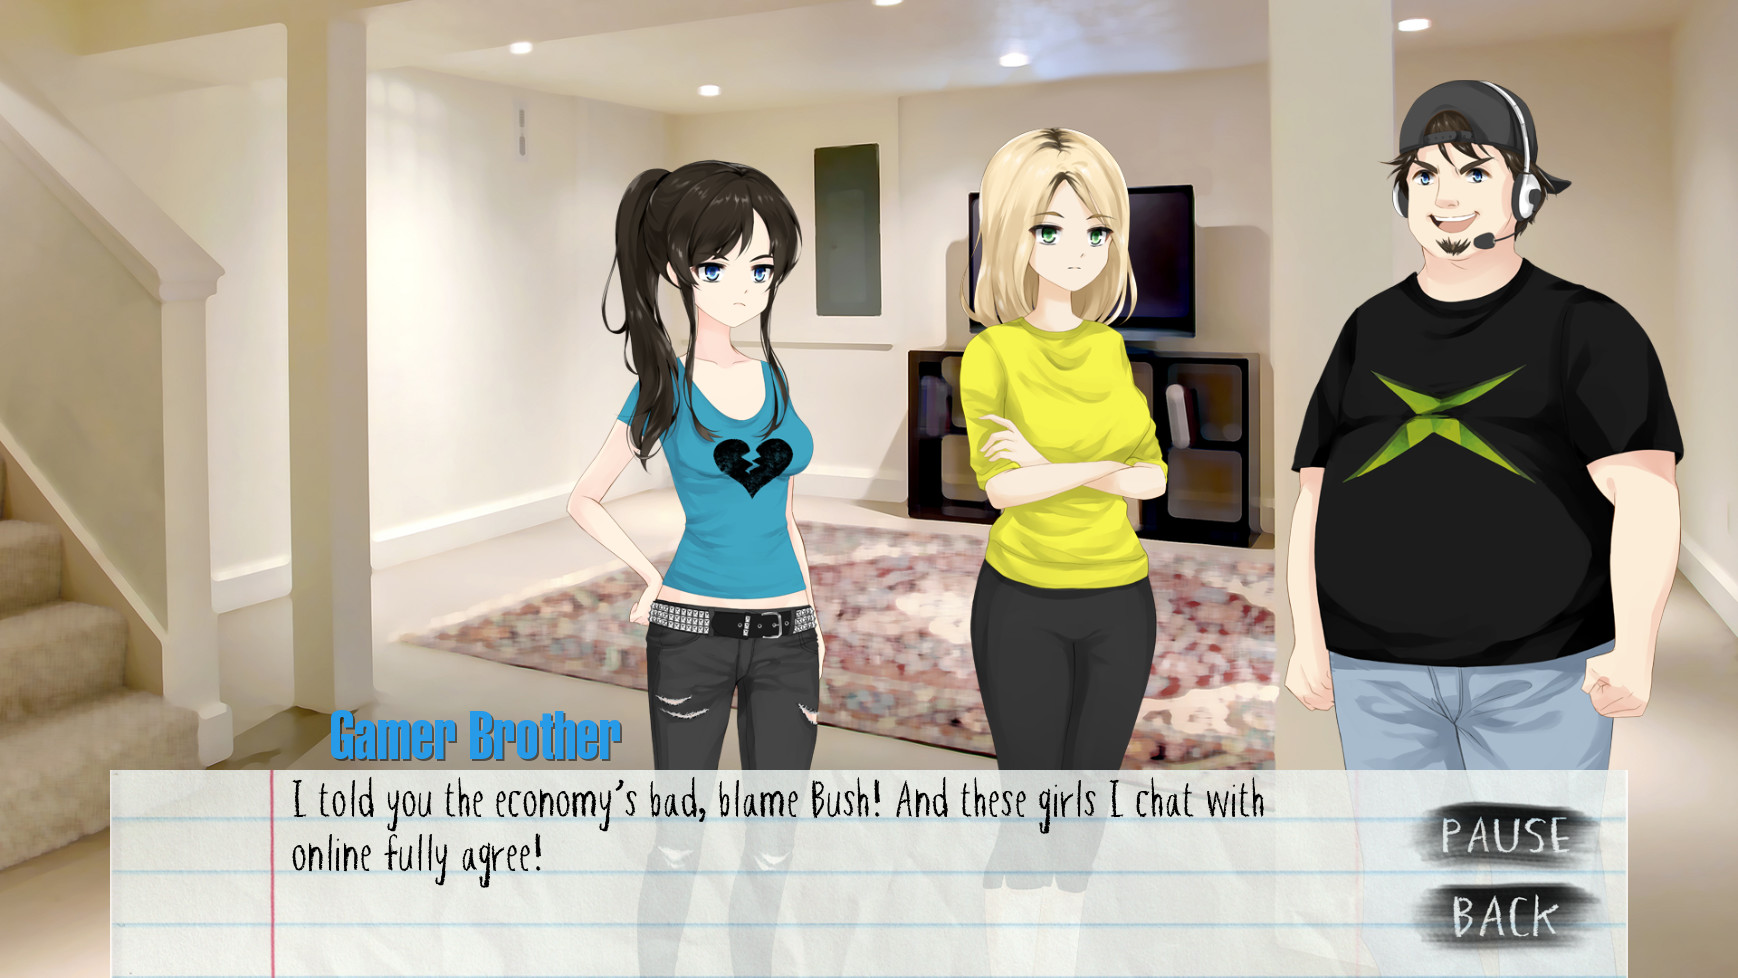 Class of '09 is an Anti Visual Novel, Out Now on the Play Store - Droid  Gamers